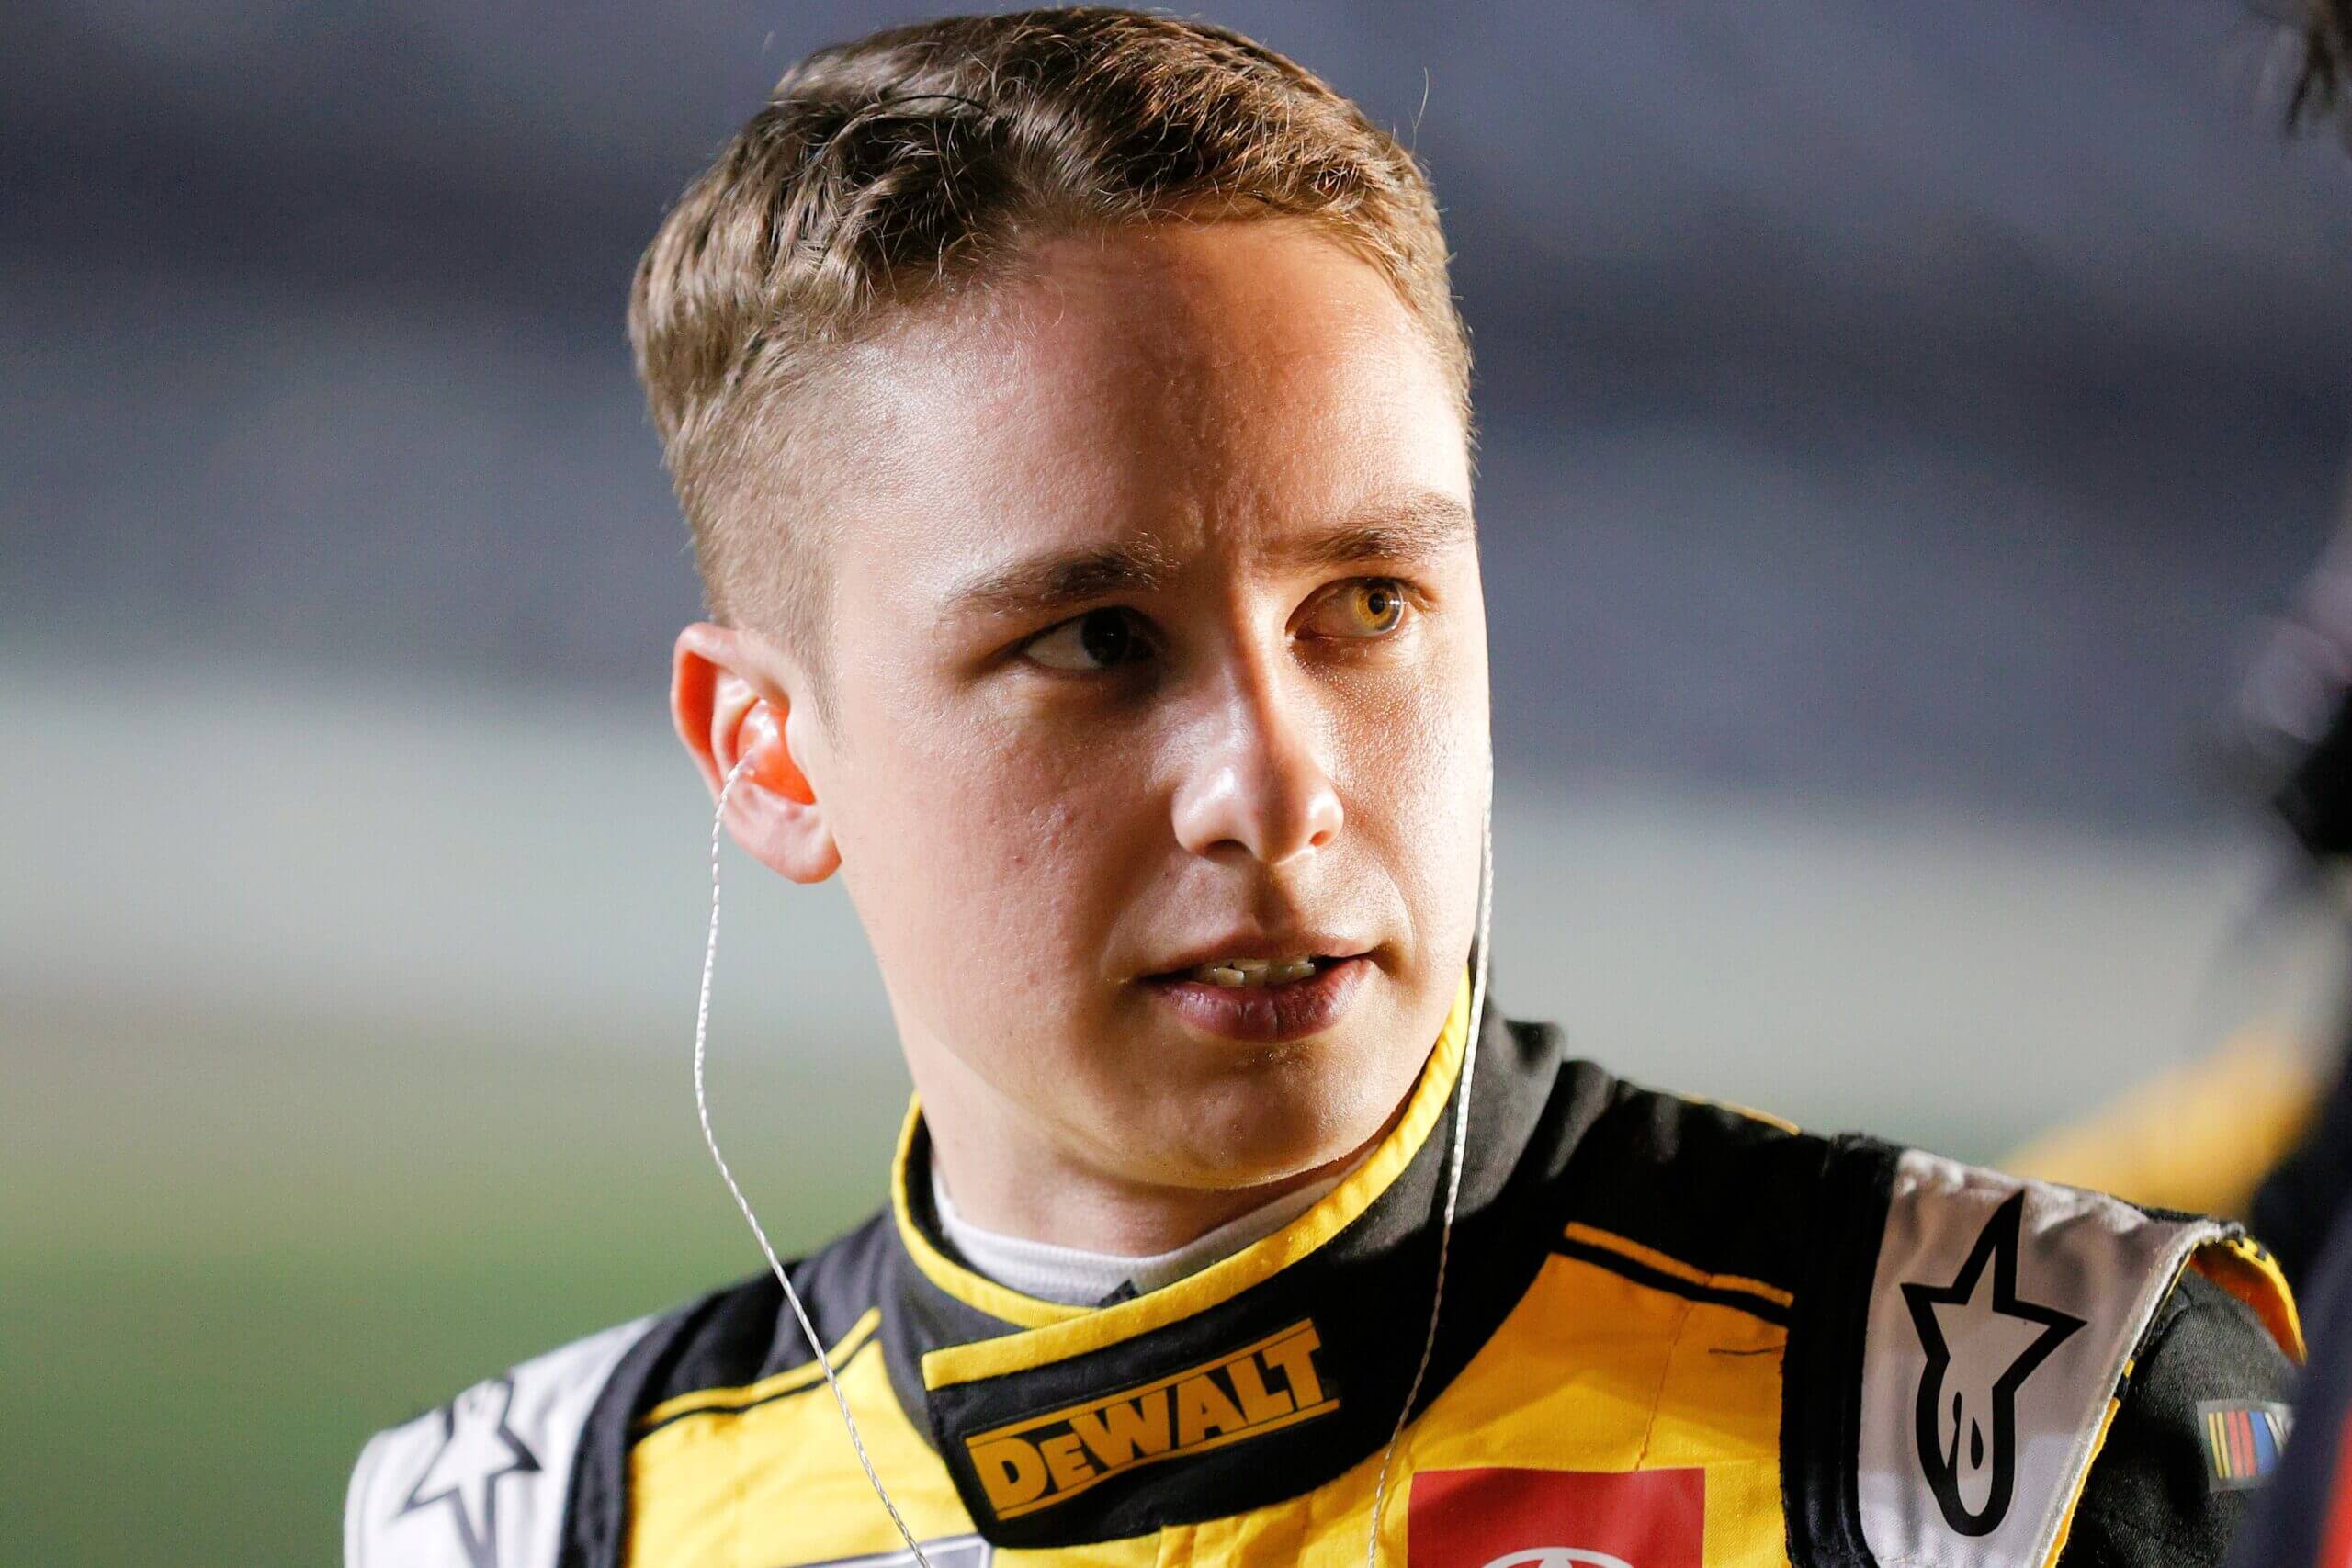 Christopher Bell Outpaces Ross Chastain at Kansas NASCAR Cup